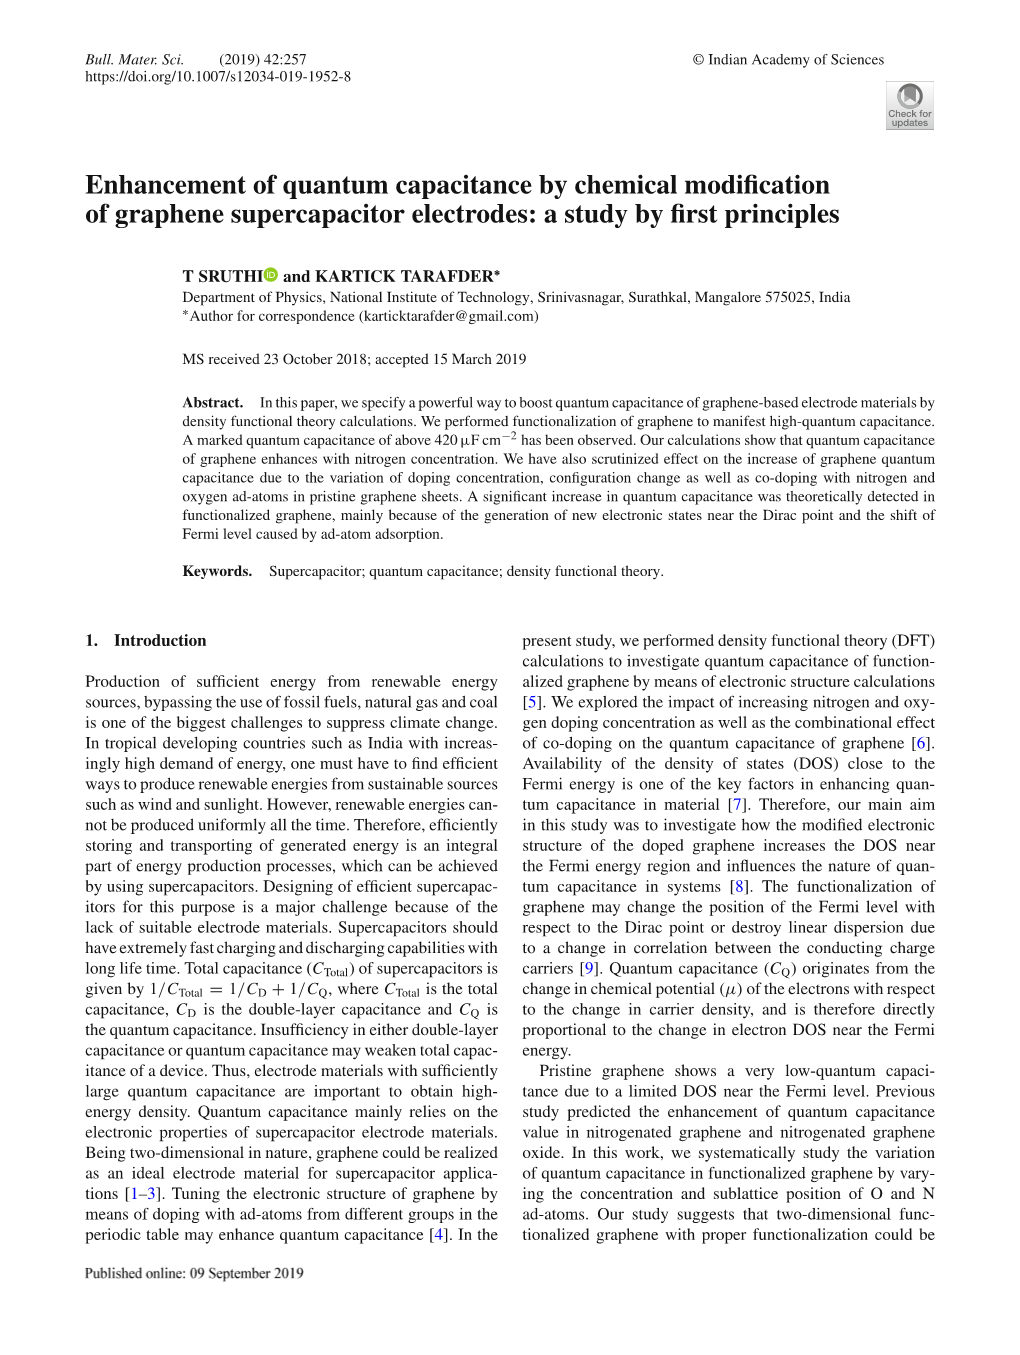 Enhancement of Quantum Capacitance by Chemical Modiﬁcation of Graphene Supercapacitor Electrodes: a Study by ﬁrst Principles